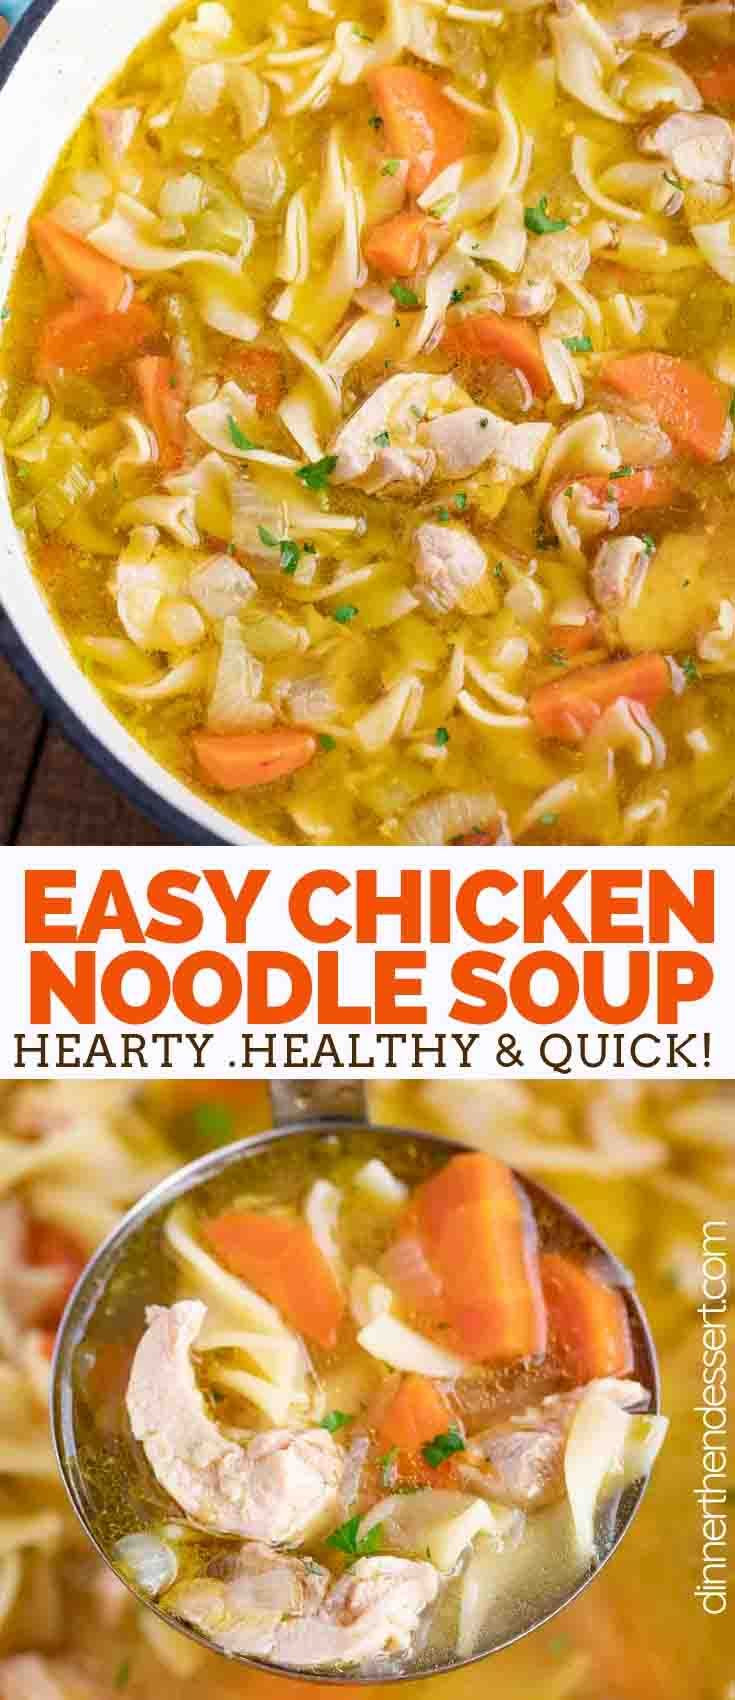 Seasoning For Chicken Noodle Soup
 Chicken Noodle Soup is a classic soup recipe made with